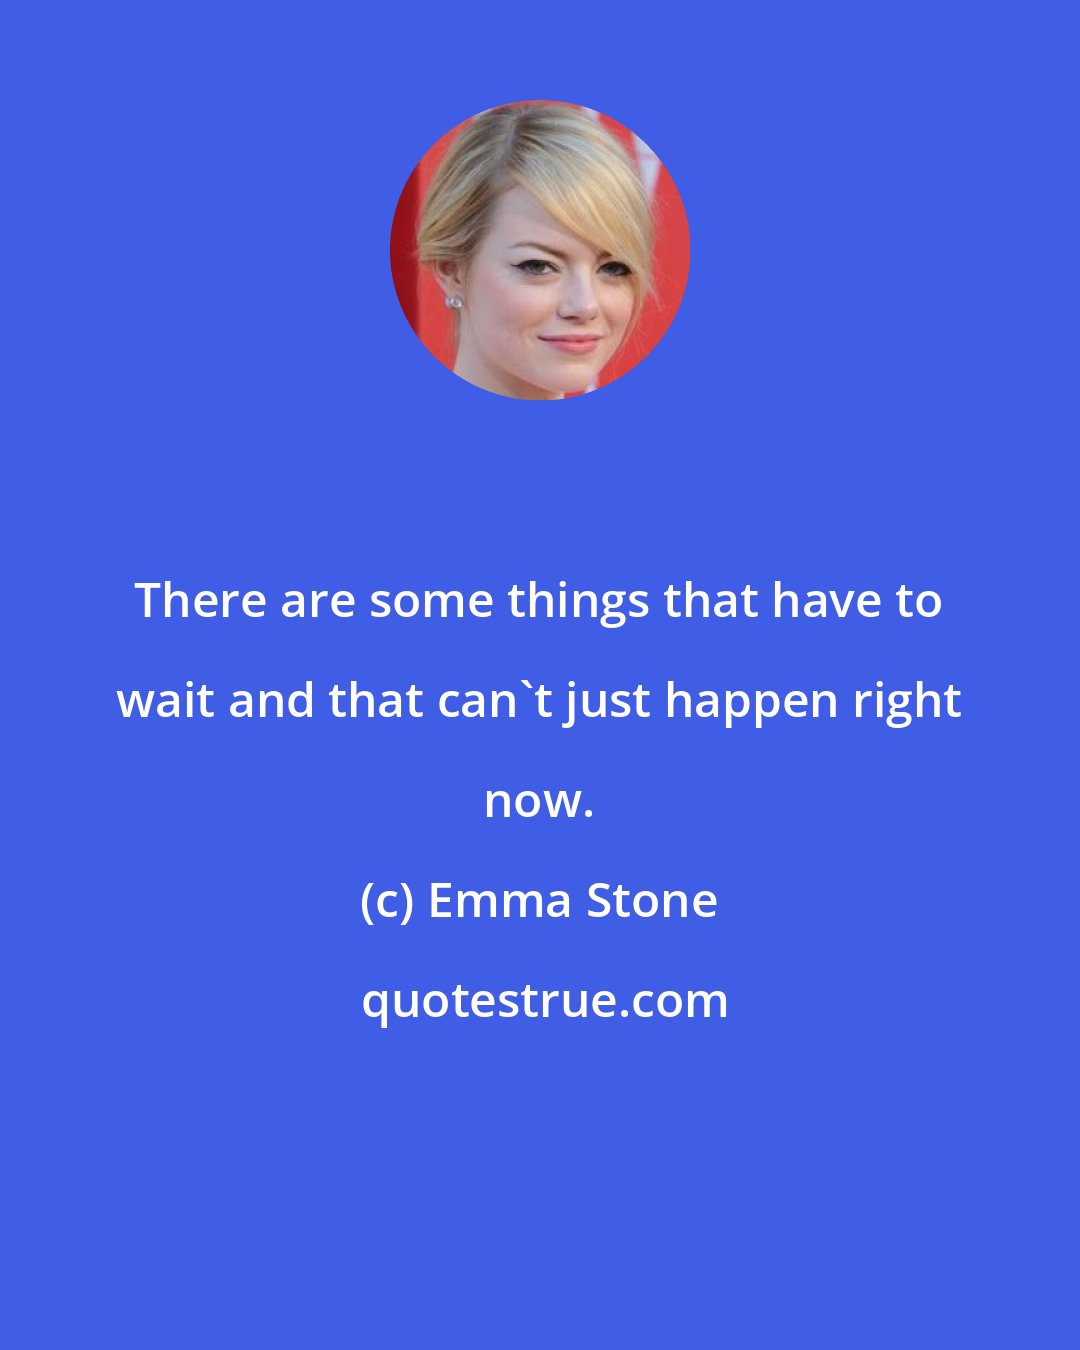 Emma Stone: There are some things that have to wait and that can't just happen right now.